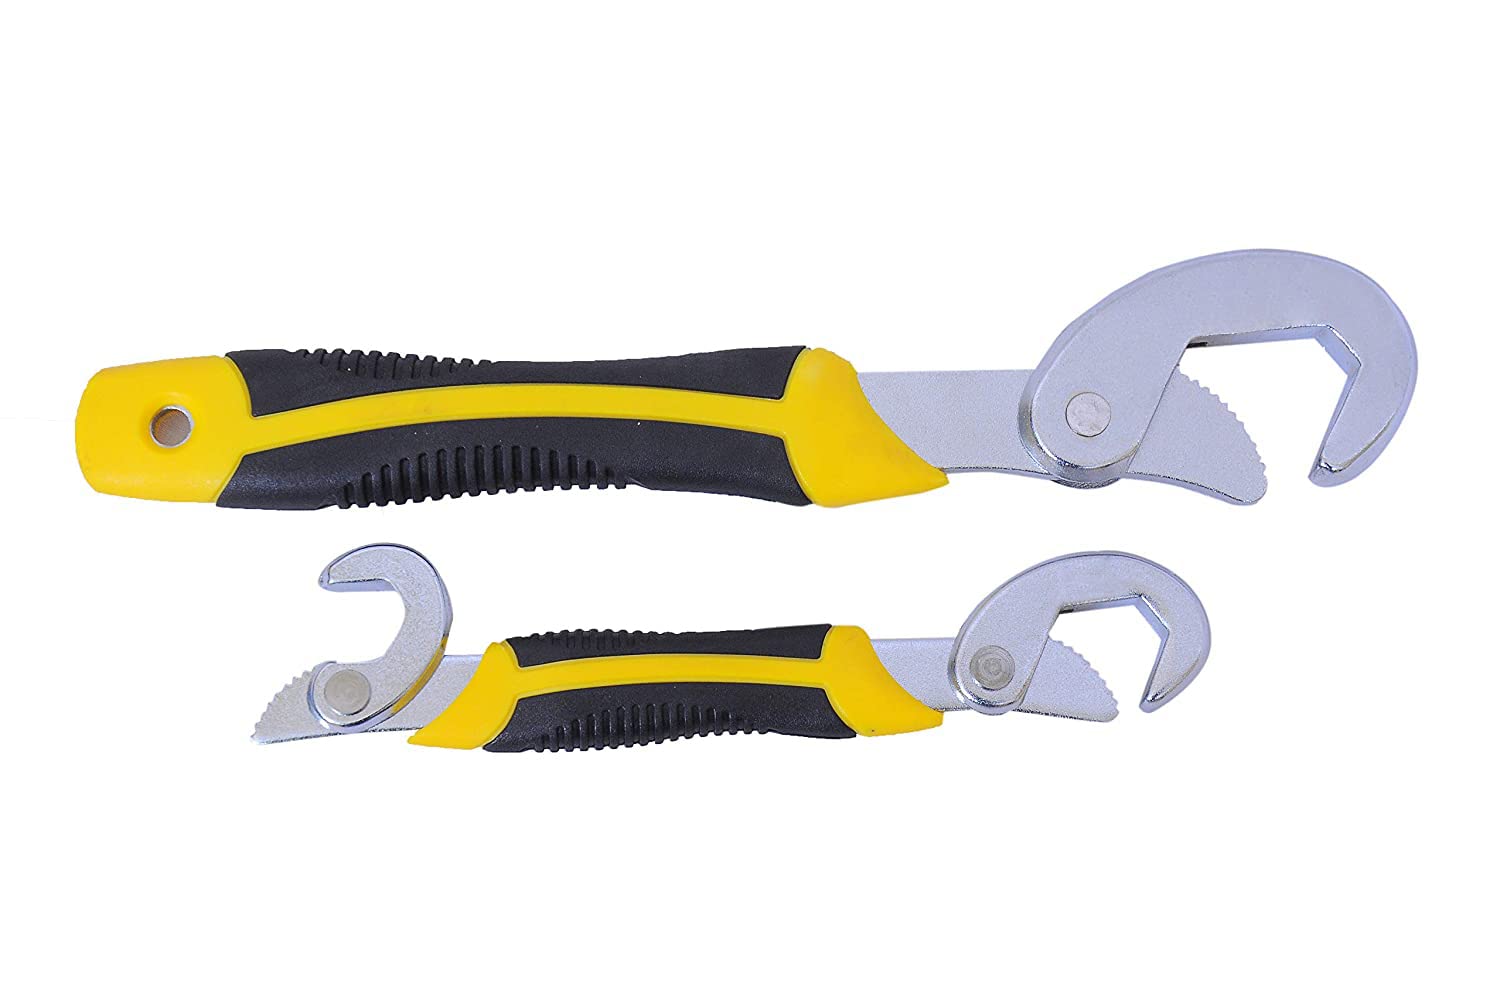 Cheston Spanner Tool Set Stainless Steel Universal Multi Function Wrench Spanner Set Tools Snap N Grip Tool Spanner (9-32 mm) Works, Hand Tools (Set of 2 Piece), Yellow,Large